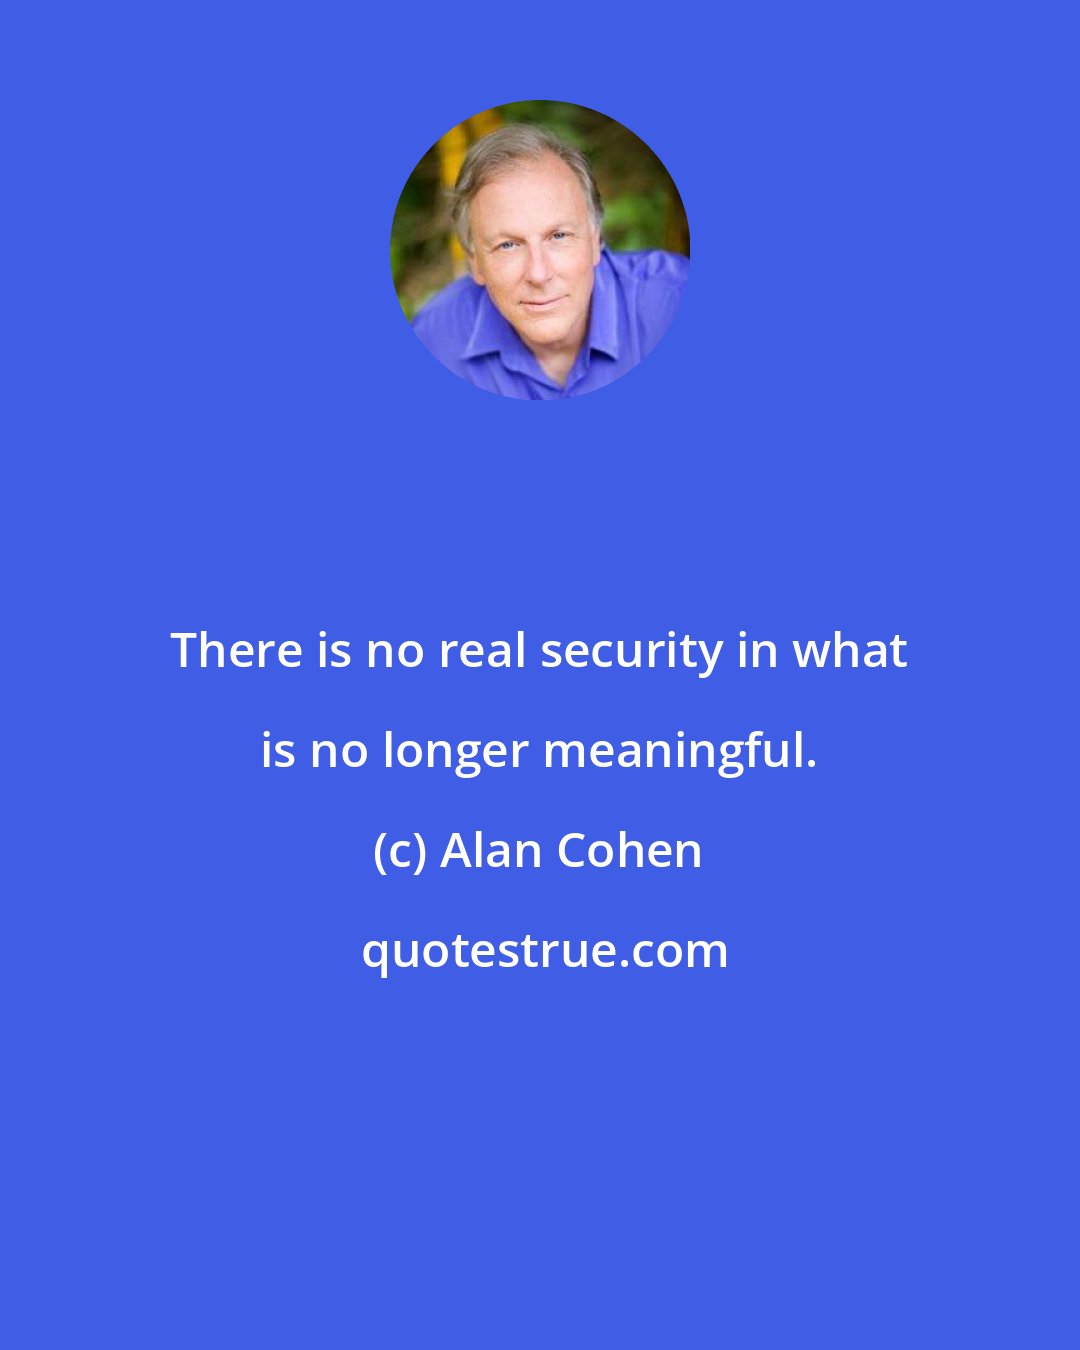 Alan Cohen: There is no real security in what is no longer meaningful.